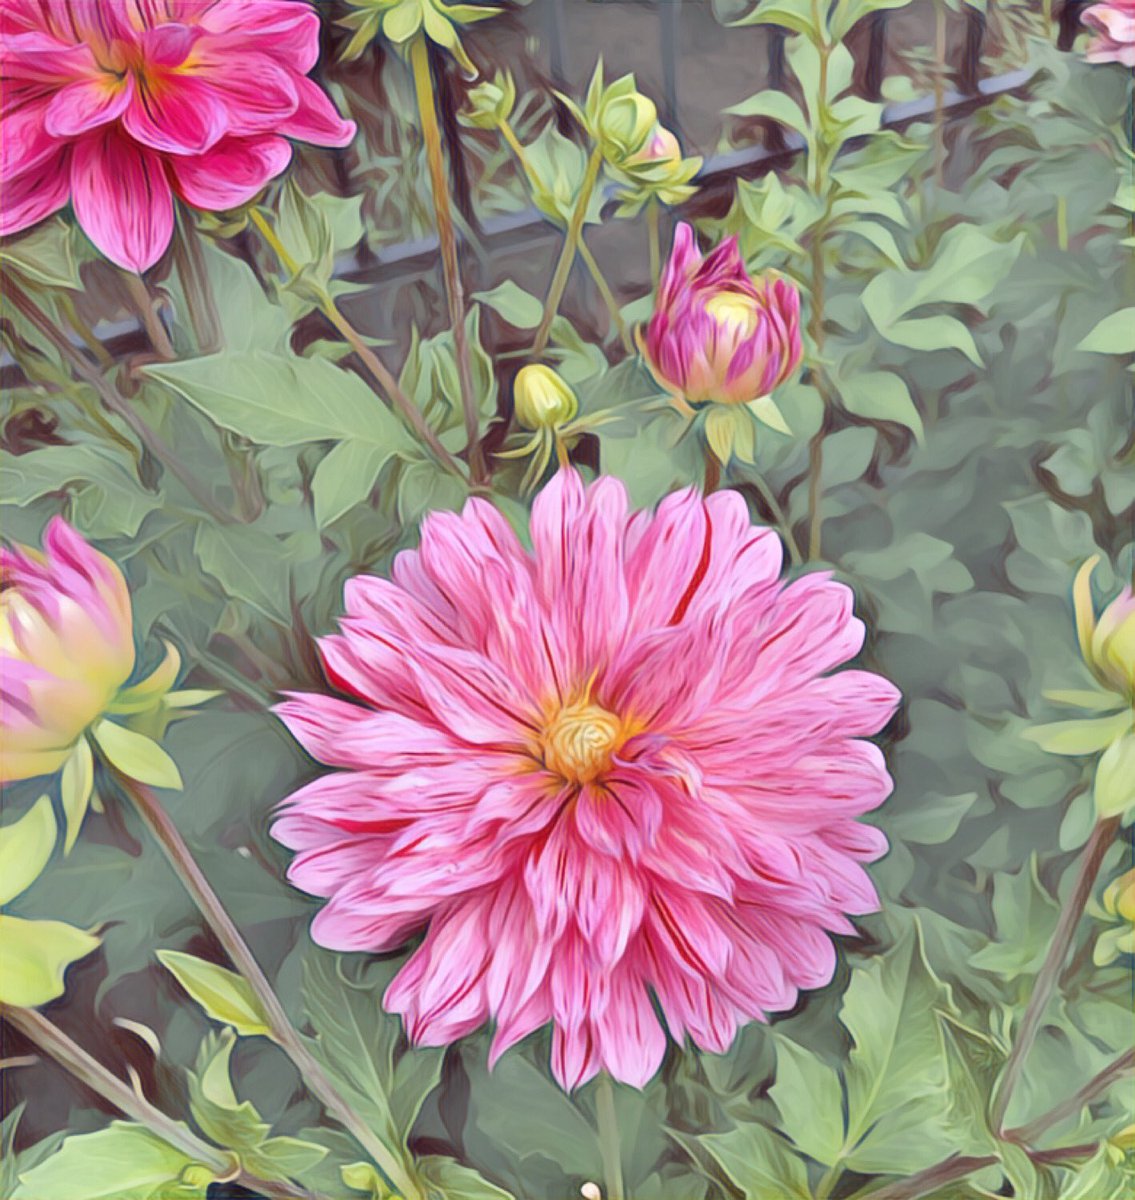 Another pink Dahlias photo from Swan Island Dahlias in Canby. Converted to #artwork using #PicsArt and #oilpaintingeffect along with #sketchymagicfilter #dahlias #pinkflowers #canbyoregon #PacificNorthwest #halfcentproject #jonathanlhall